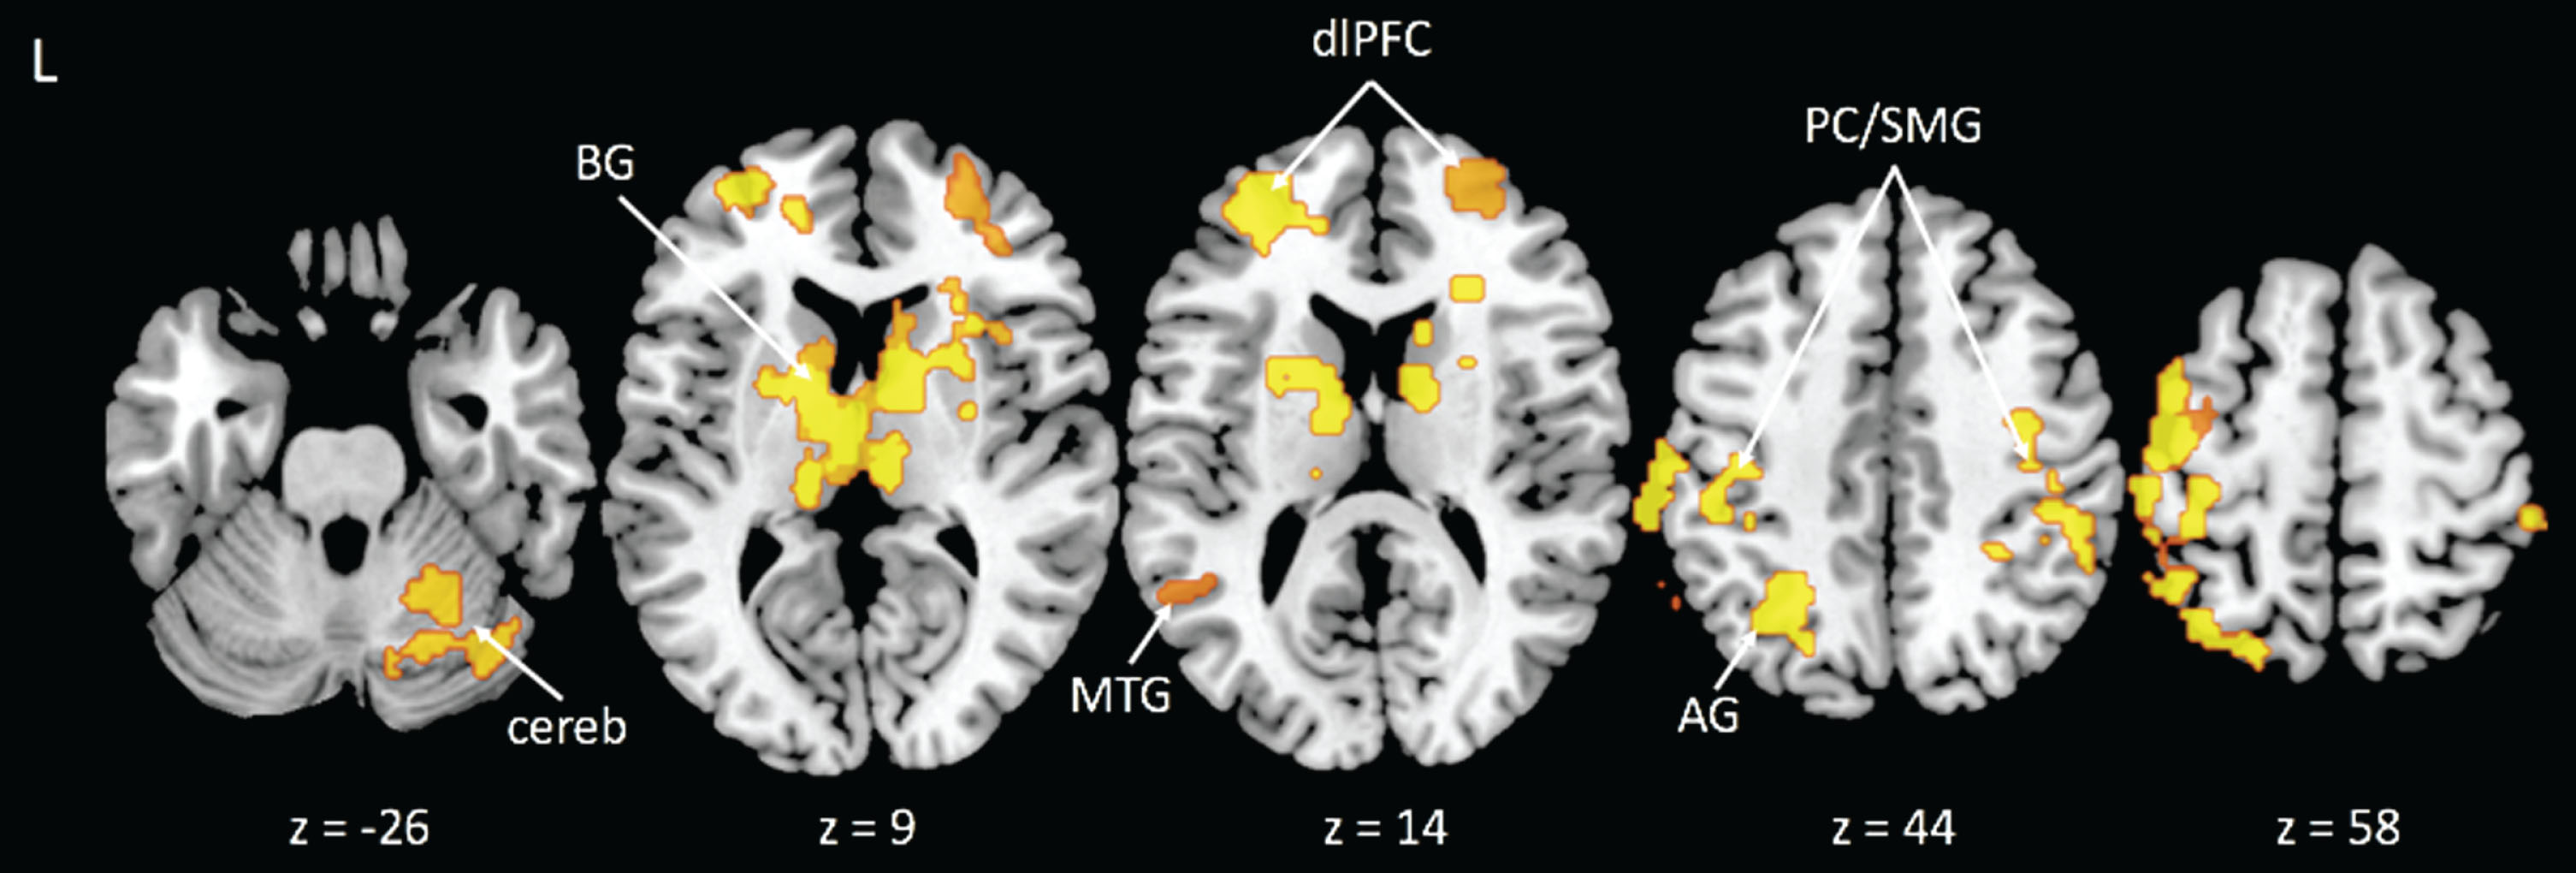 Activation clusters with greater activity related to lower cardiorespiratory fitness during the Incongruent > Congruent condition contrast. Note: BG = basal ganglia; cereb = cerebellum; MTG = middle temporal gyrus; dlPFC = dorsolateral prefrontal cortex; AG = angular gyrus; PC/SMG = postcentral/supramarginal gyri.